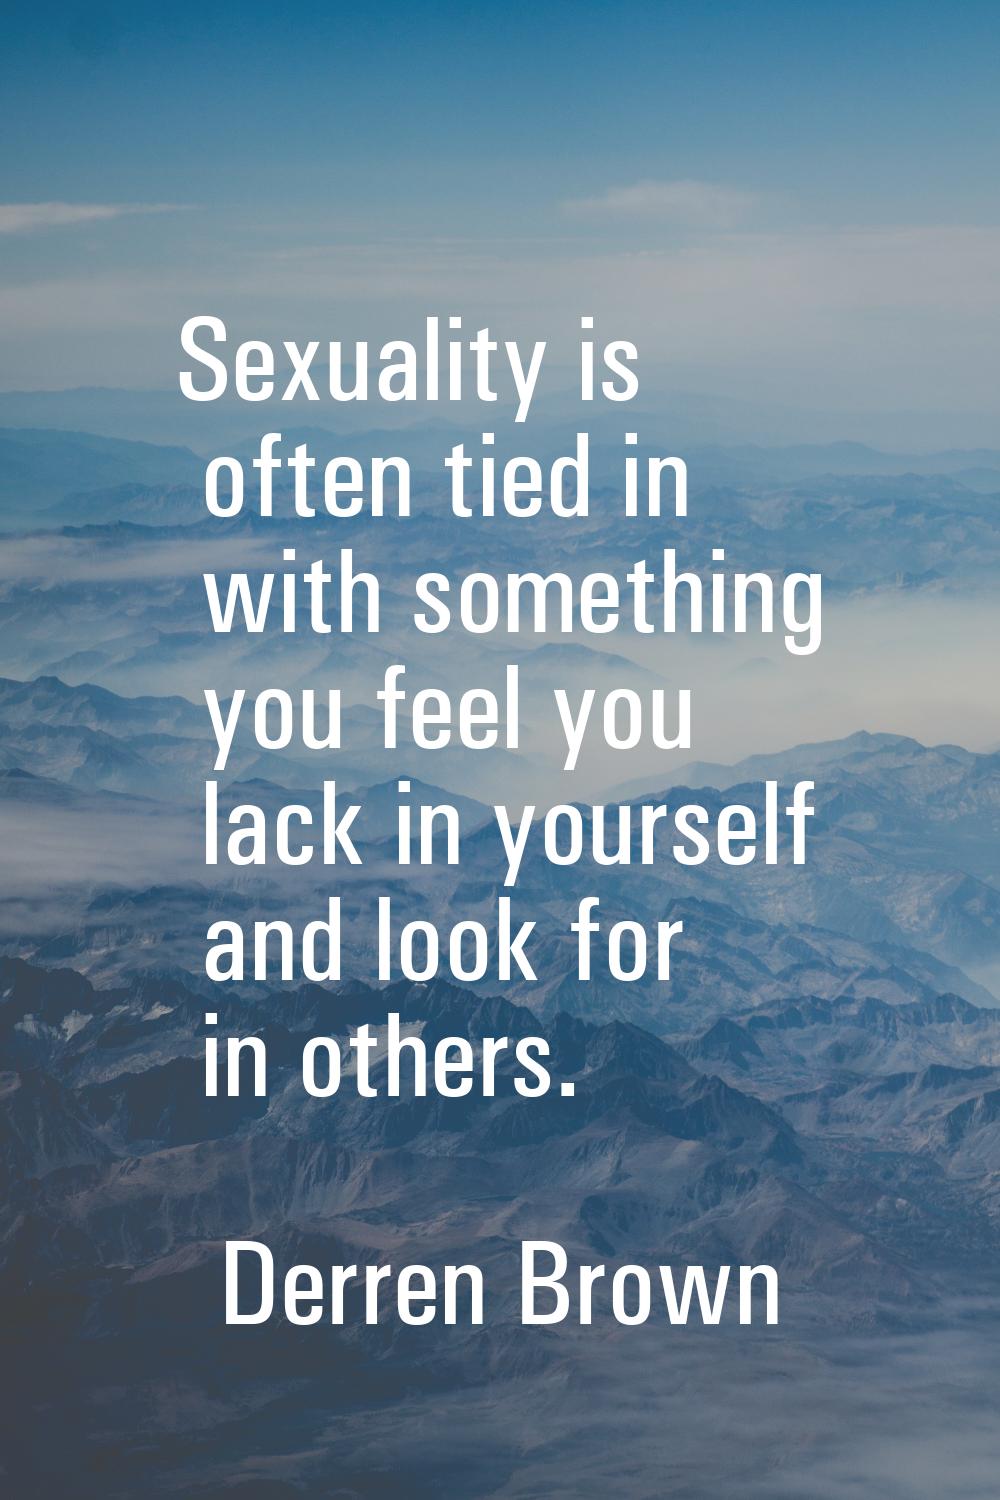 Sexuality is often tied in with something you feel you lack in yourself and look for in others.